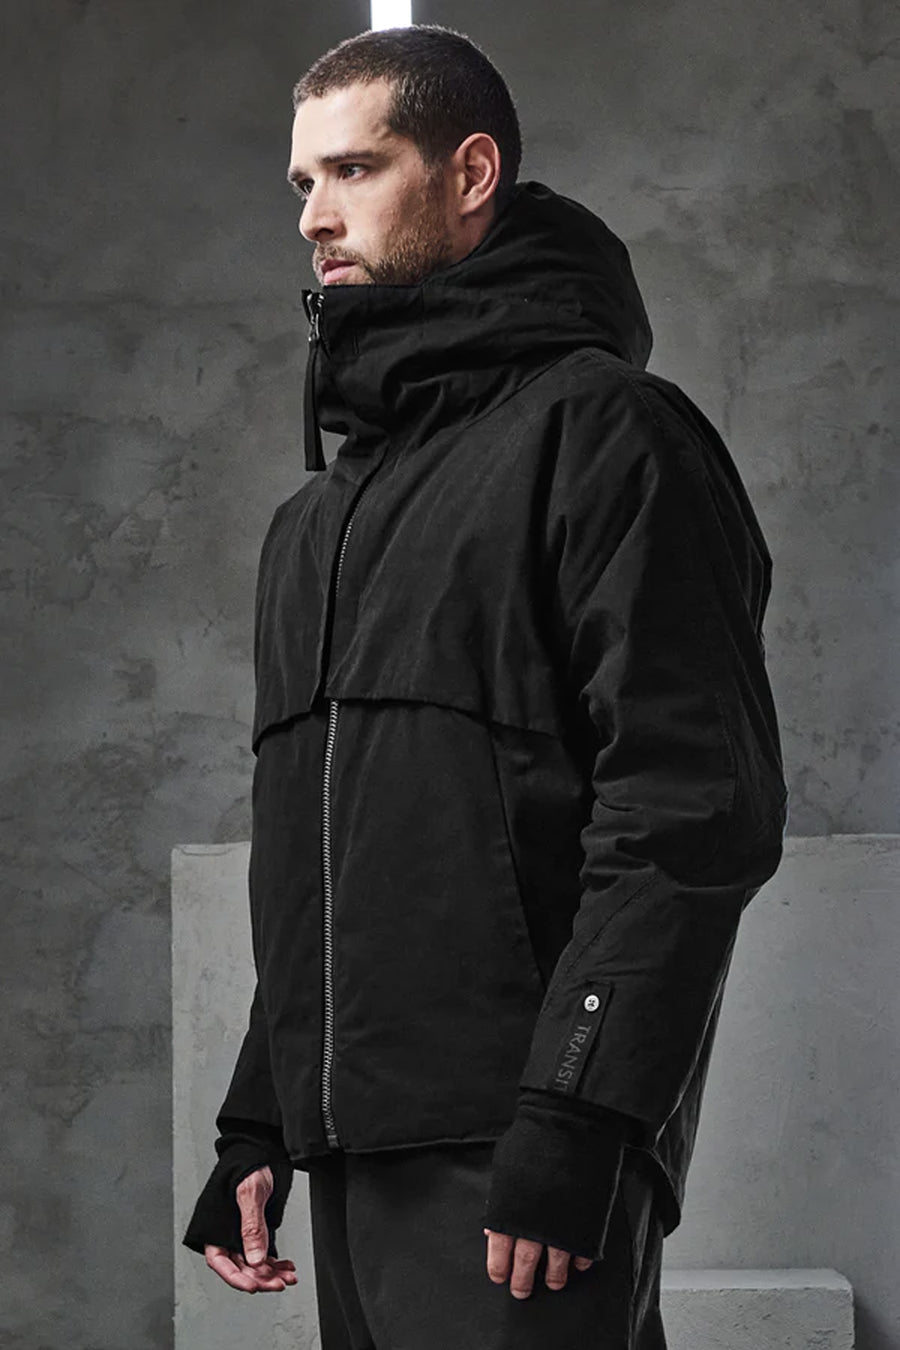 Buy the Transit Reversible Oversize Duck Down Jacket in Black at Intro. Spend £50 for free UK delivery. Official stockists. We ship worldwide.